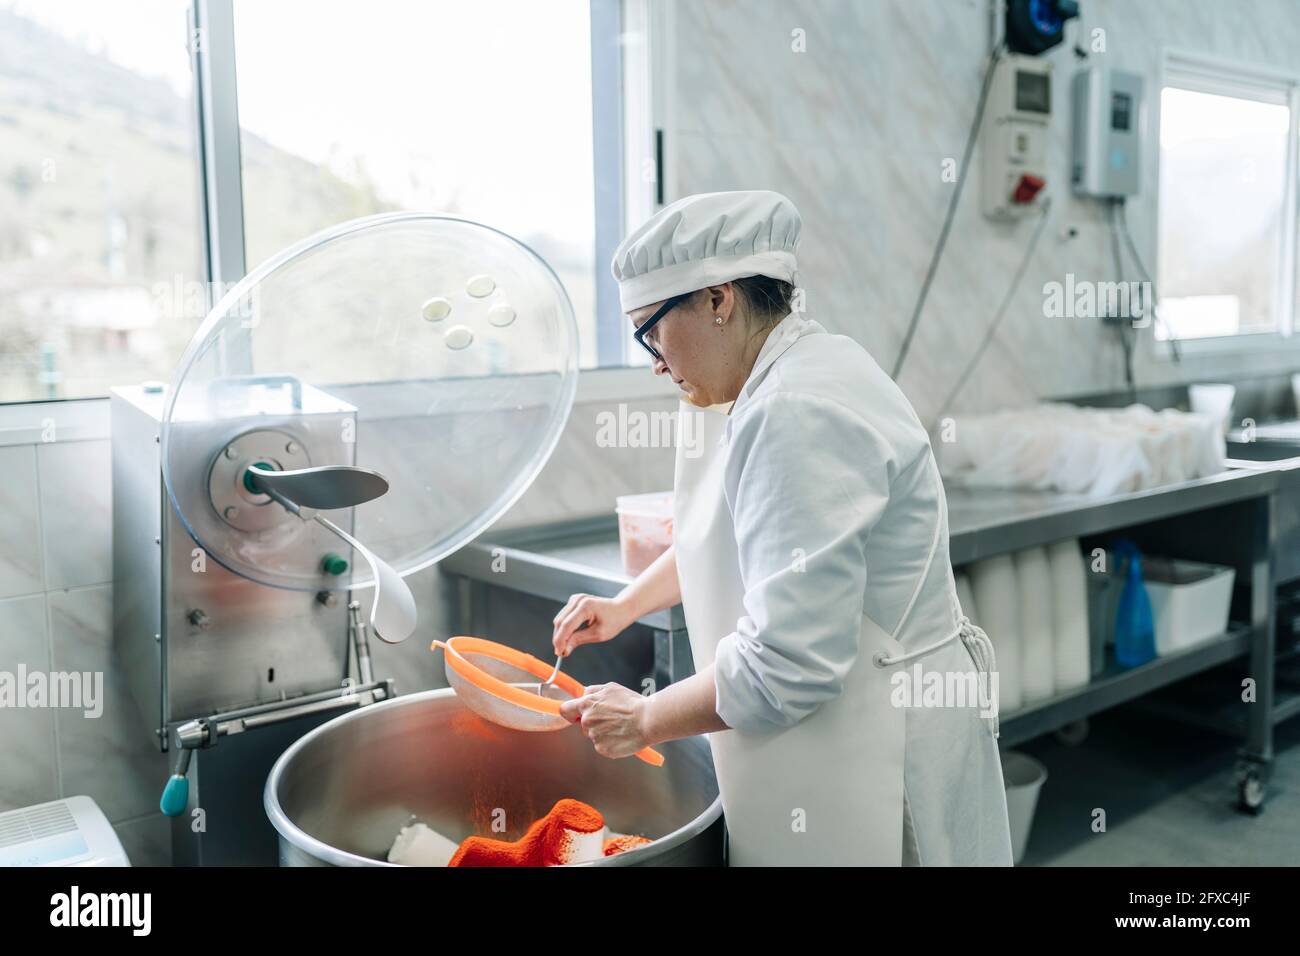 Female cheese expert using strainer in factory Stock Photo